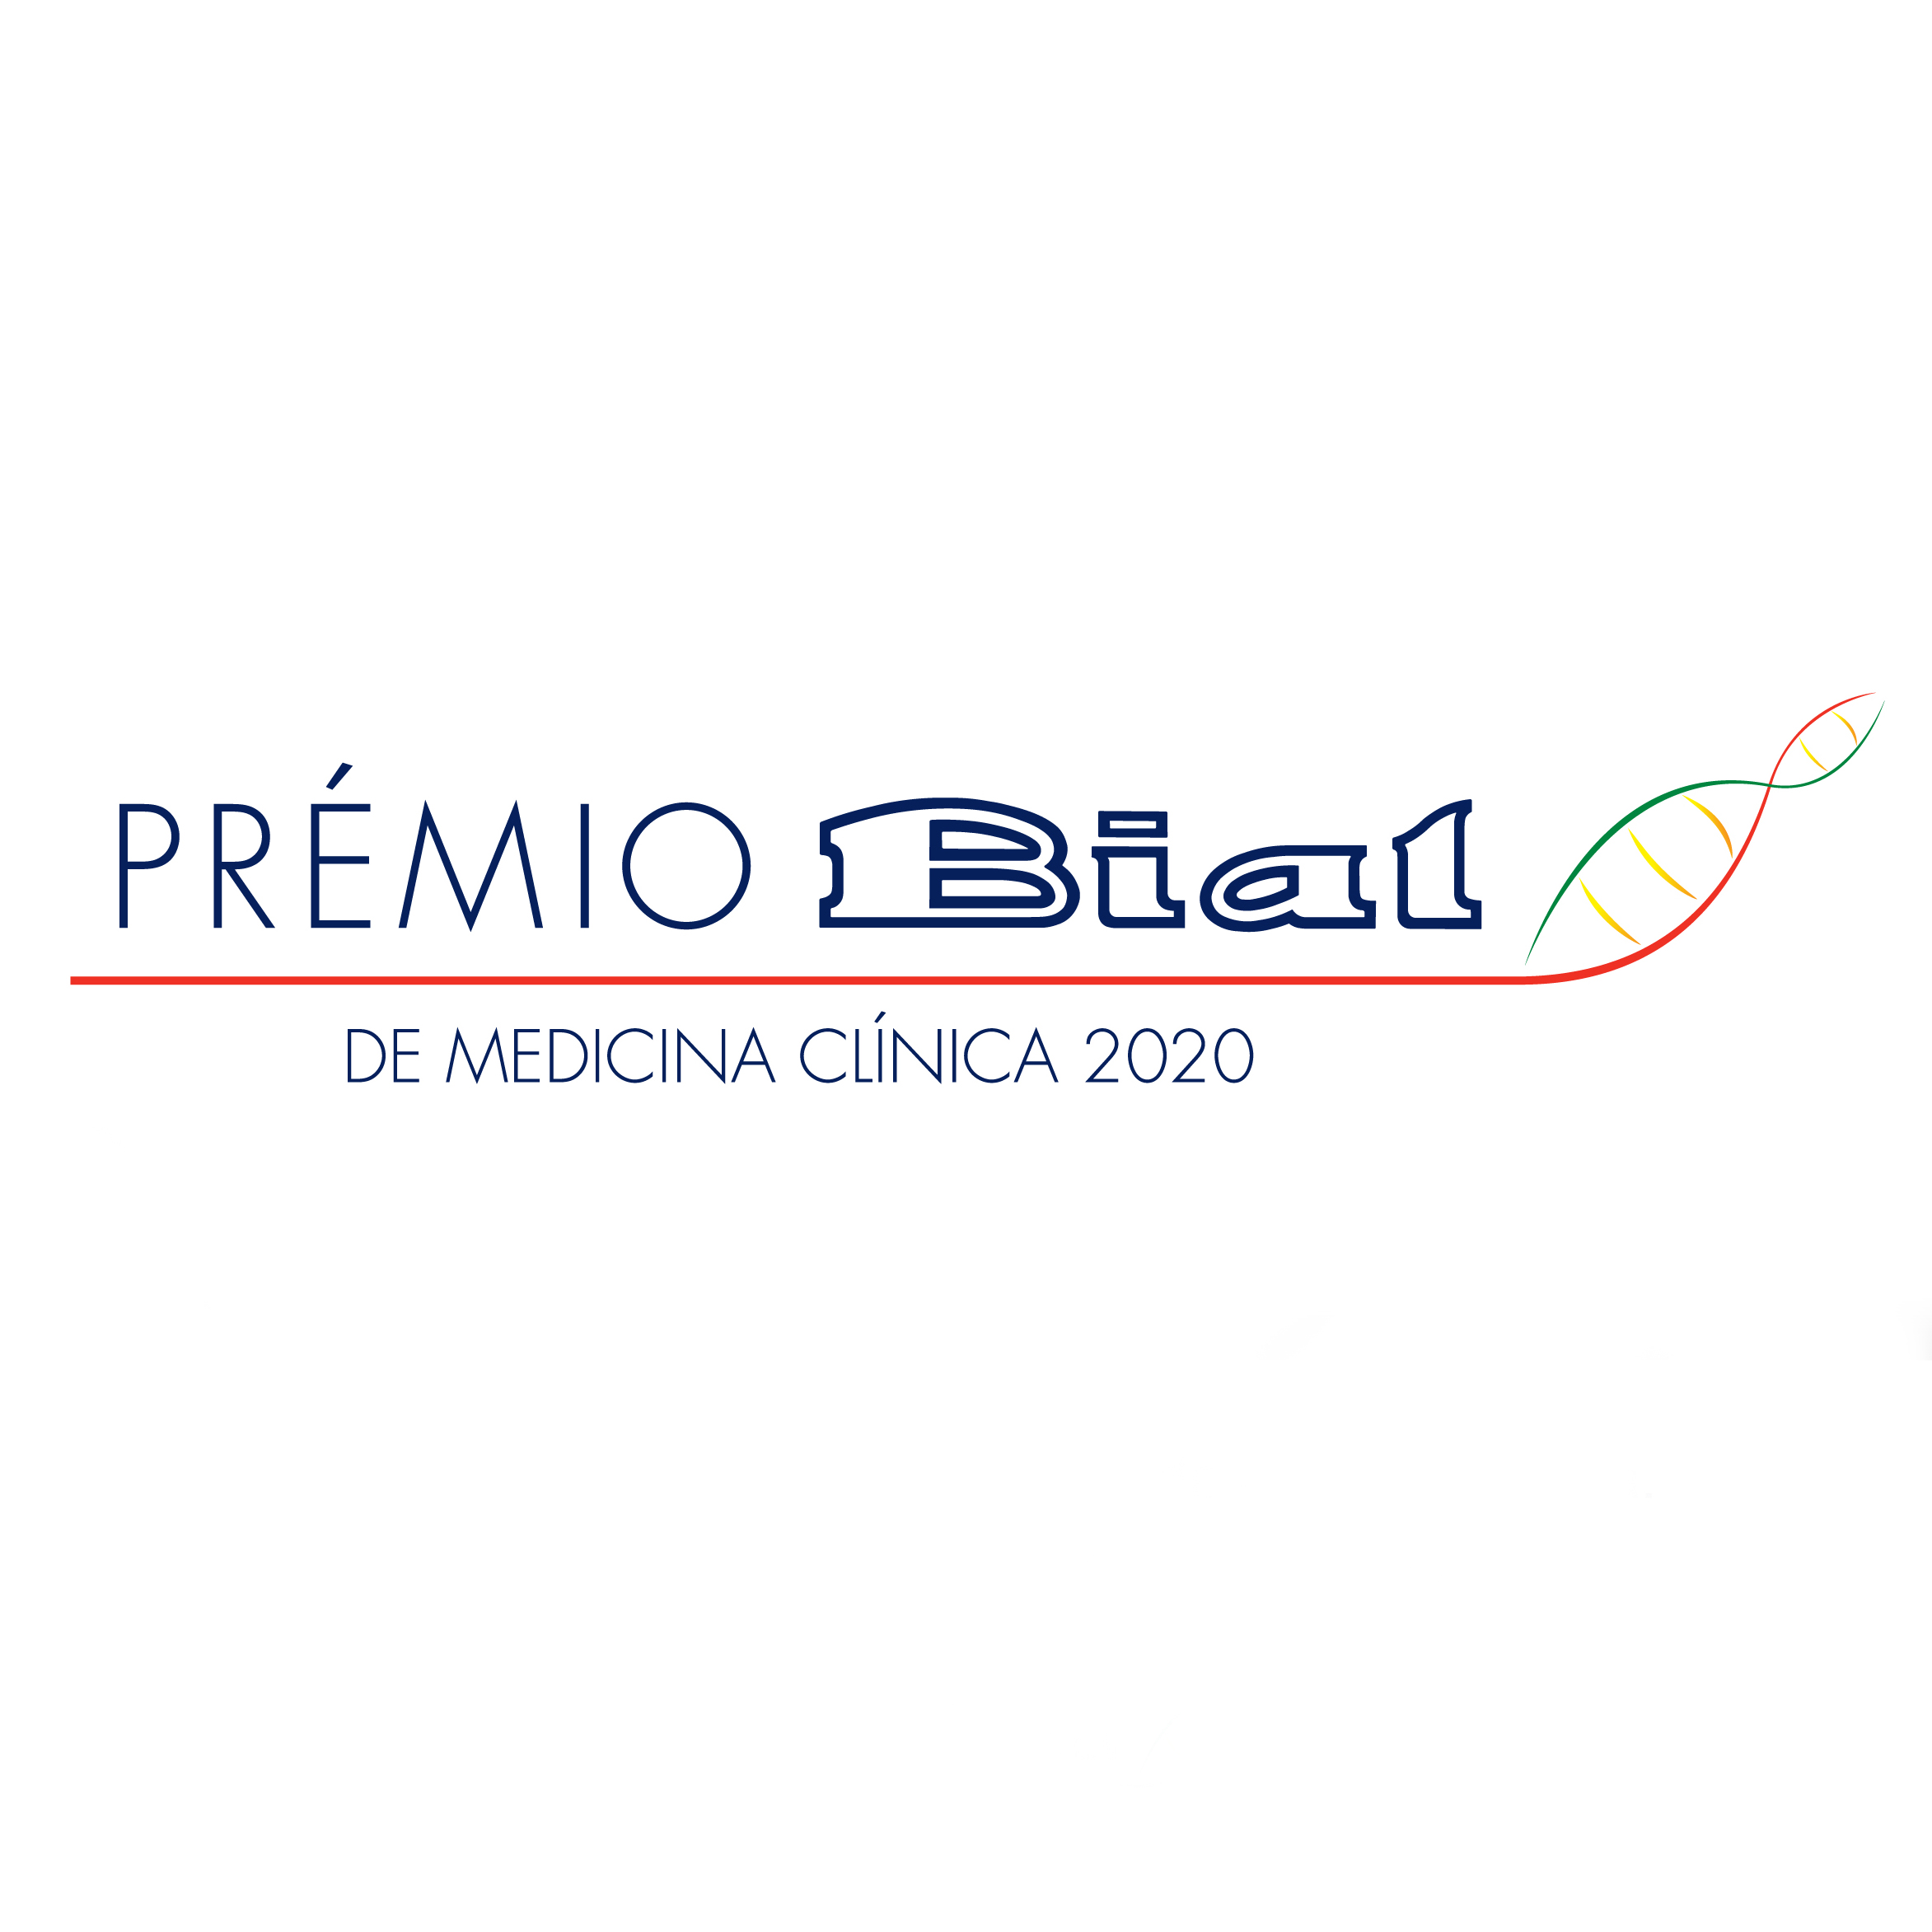 Champalimaud Foundation team distinguished with honourable mention by the Prémio BIAL de Medicina Clínica 2020